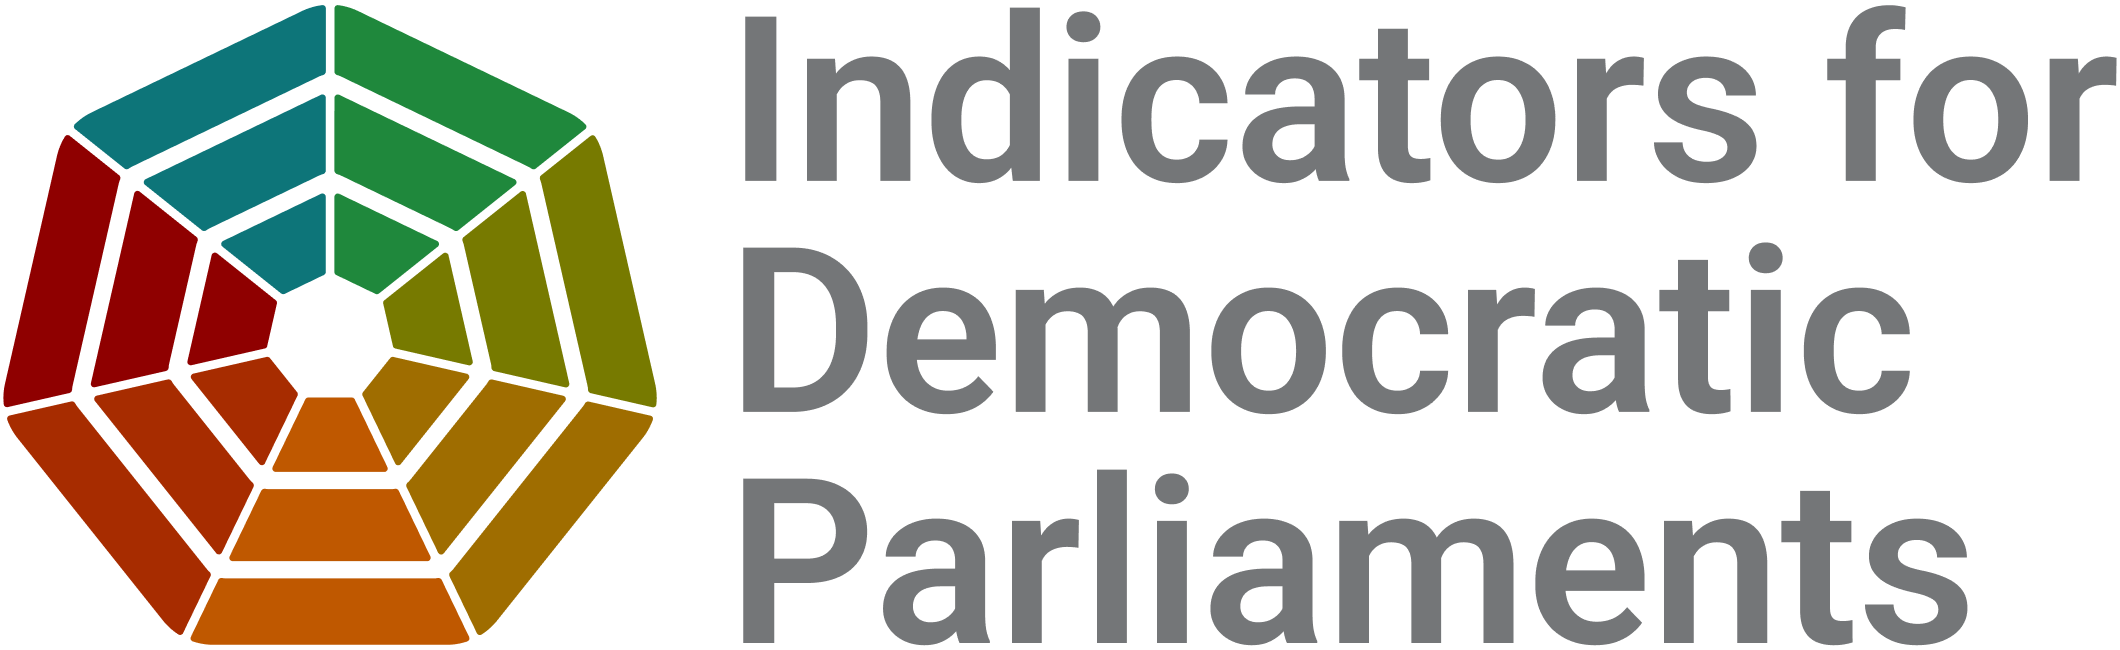 Launch of the Indicators for Democratic Parliaments